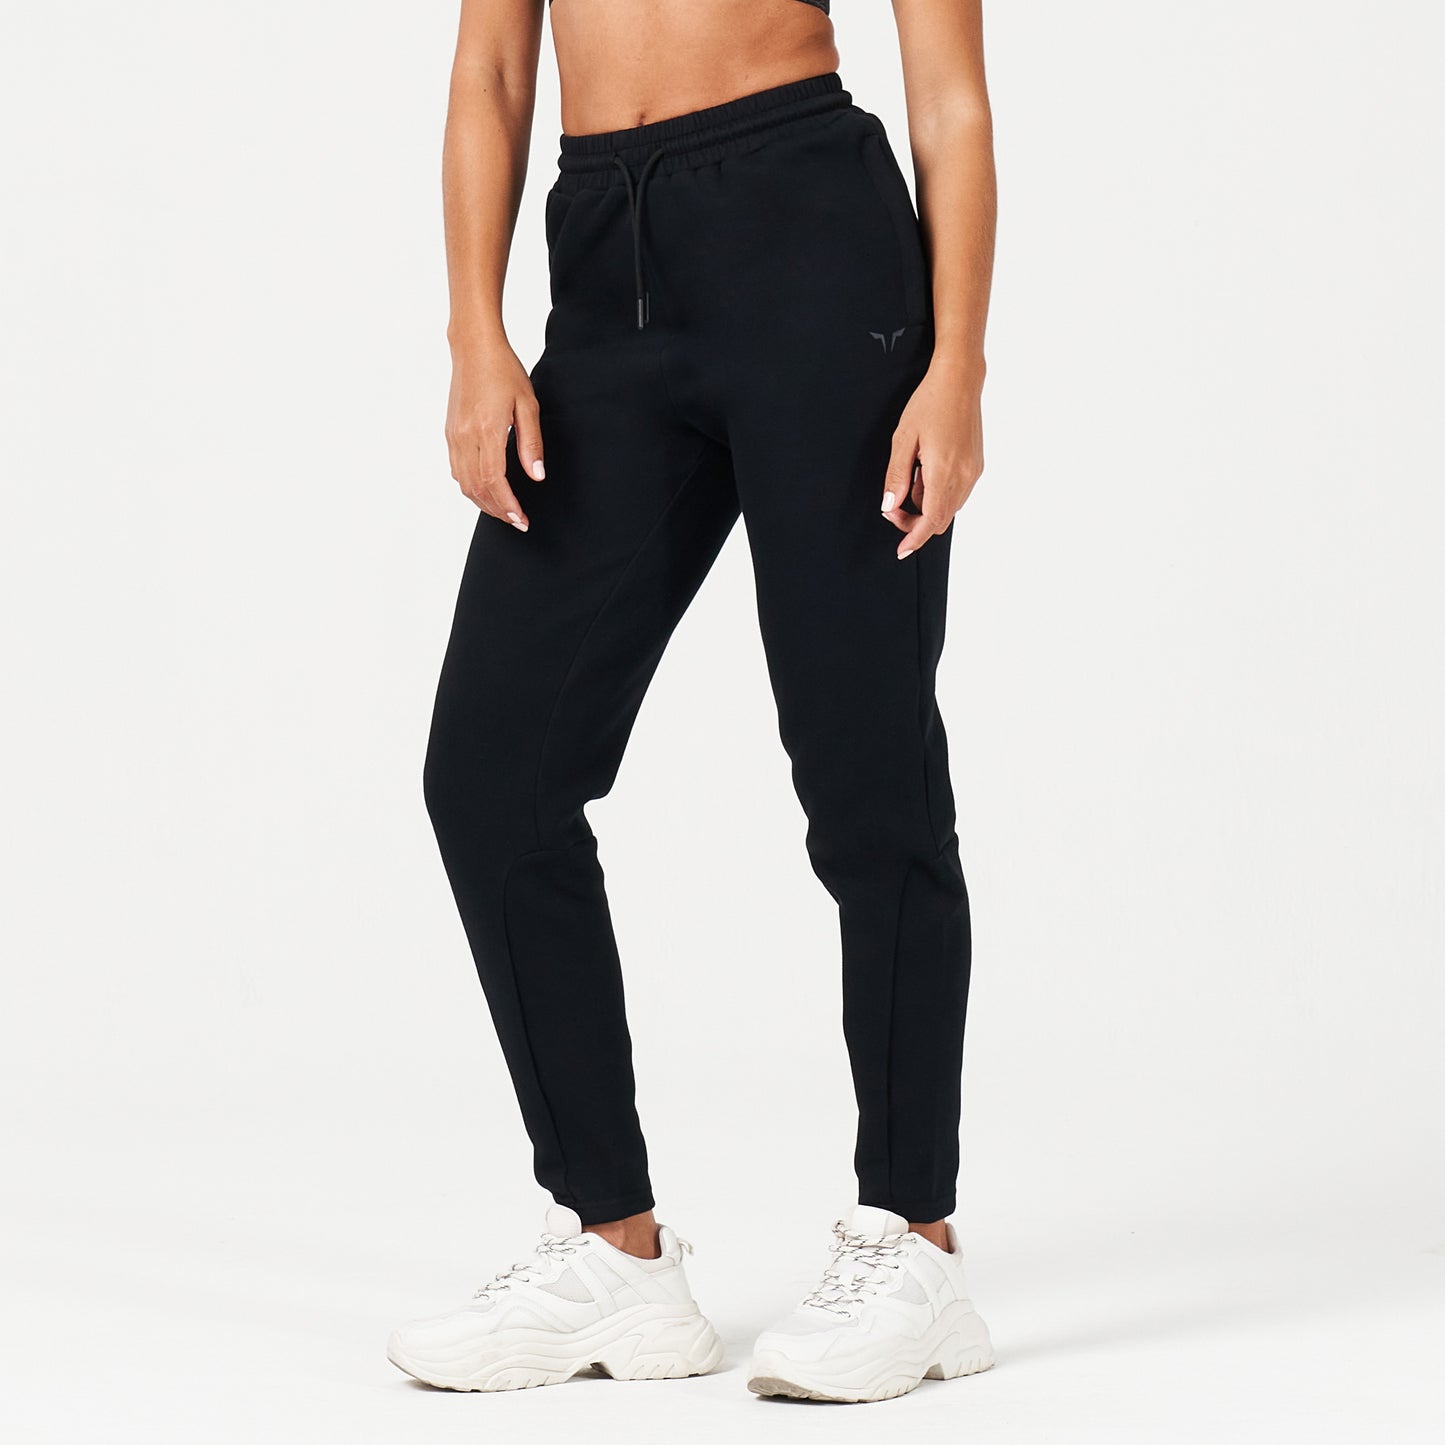 squatwolf-workout-clothes-lab360-tapered-joggers-black-gym-pants-for-women